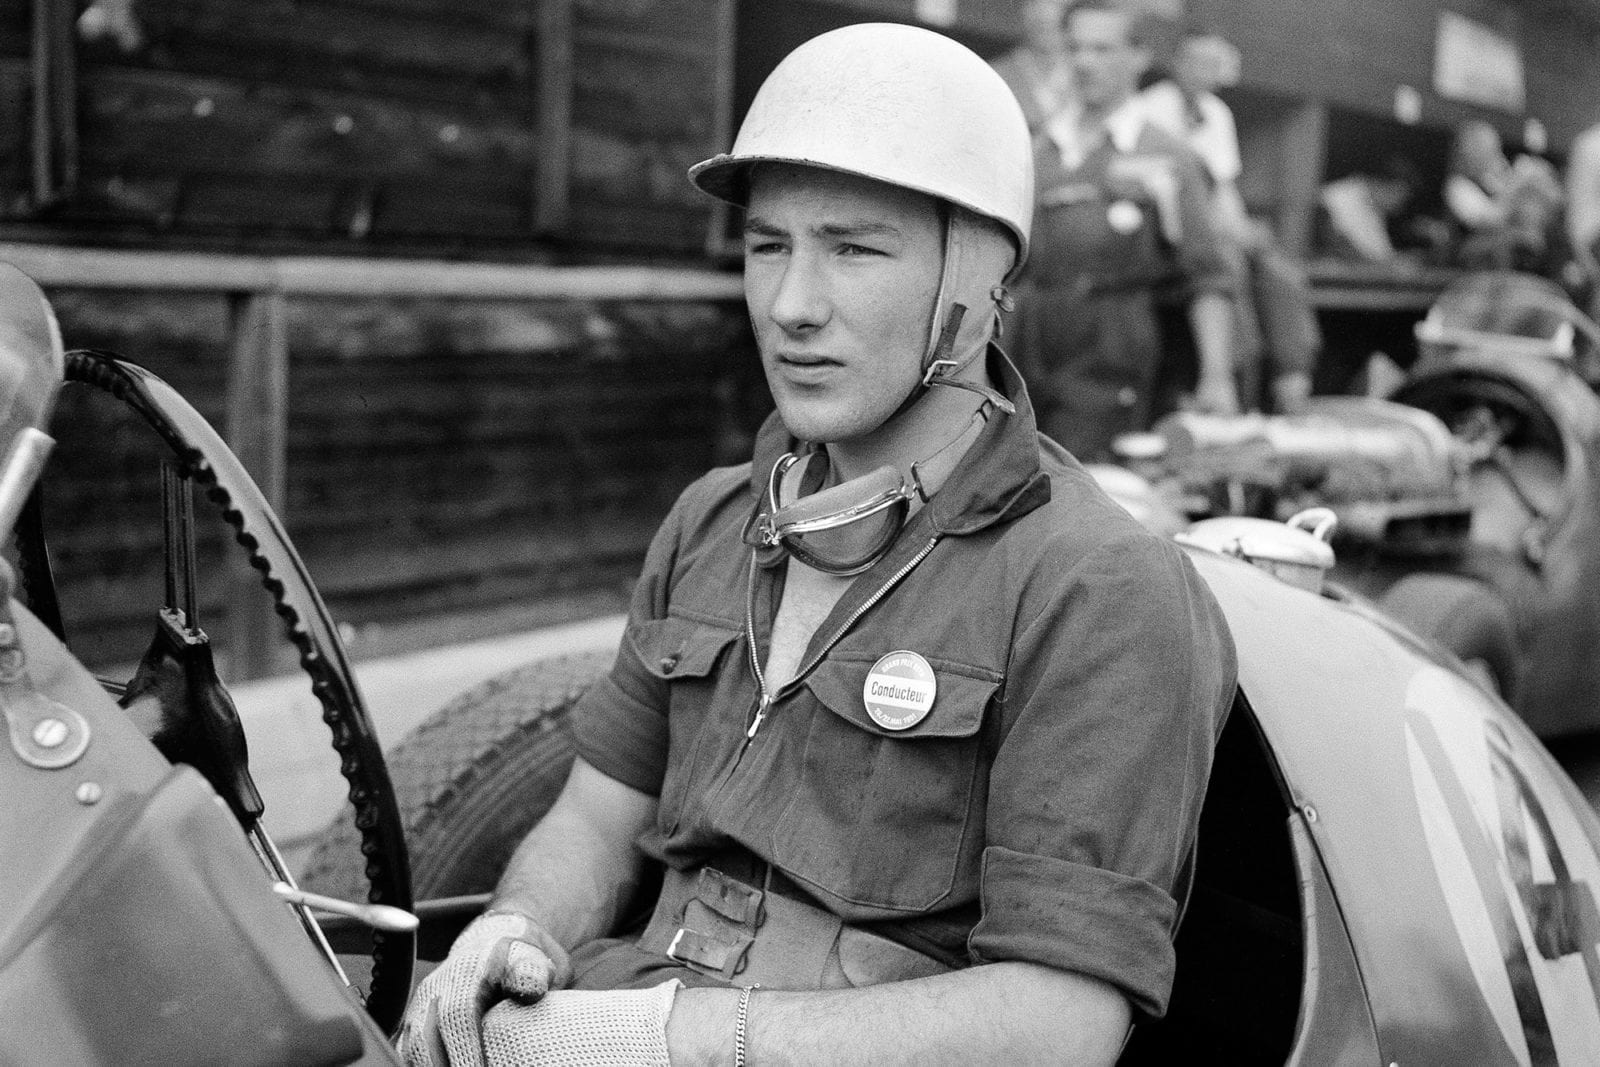 Stirling Moss in his HWM-Alta ahead of practice for the 1951 Swiss Grand Prix